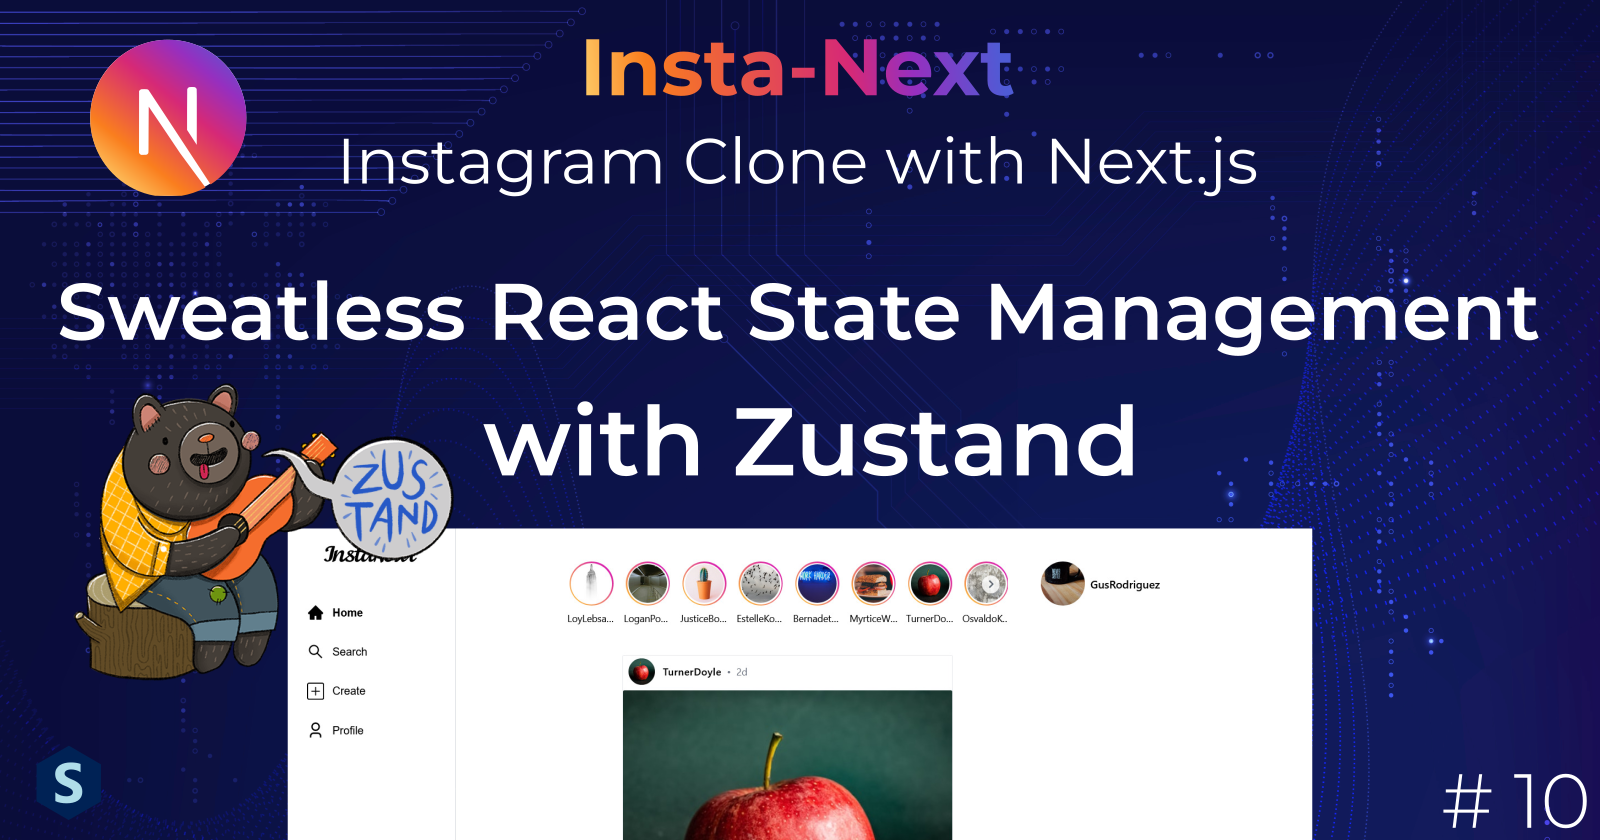 Insta-Next: Sweatless React State Management with Zustand